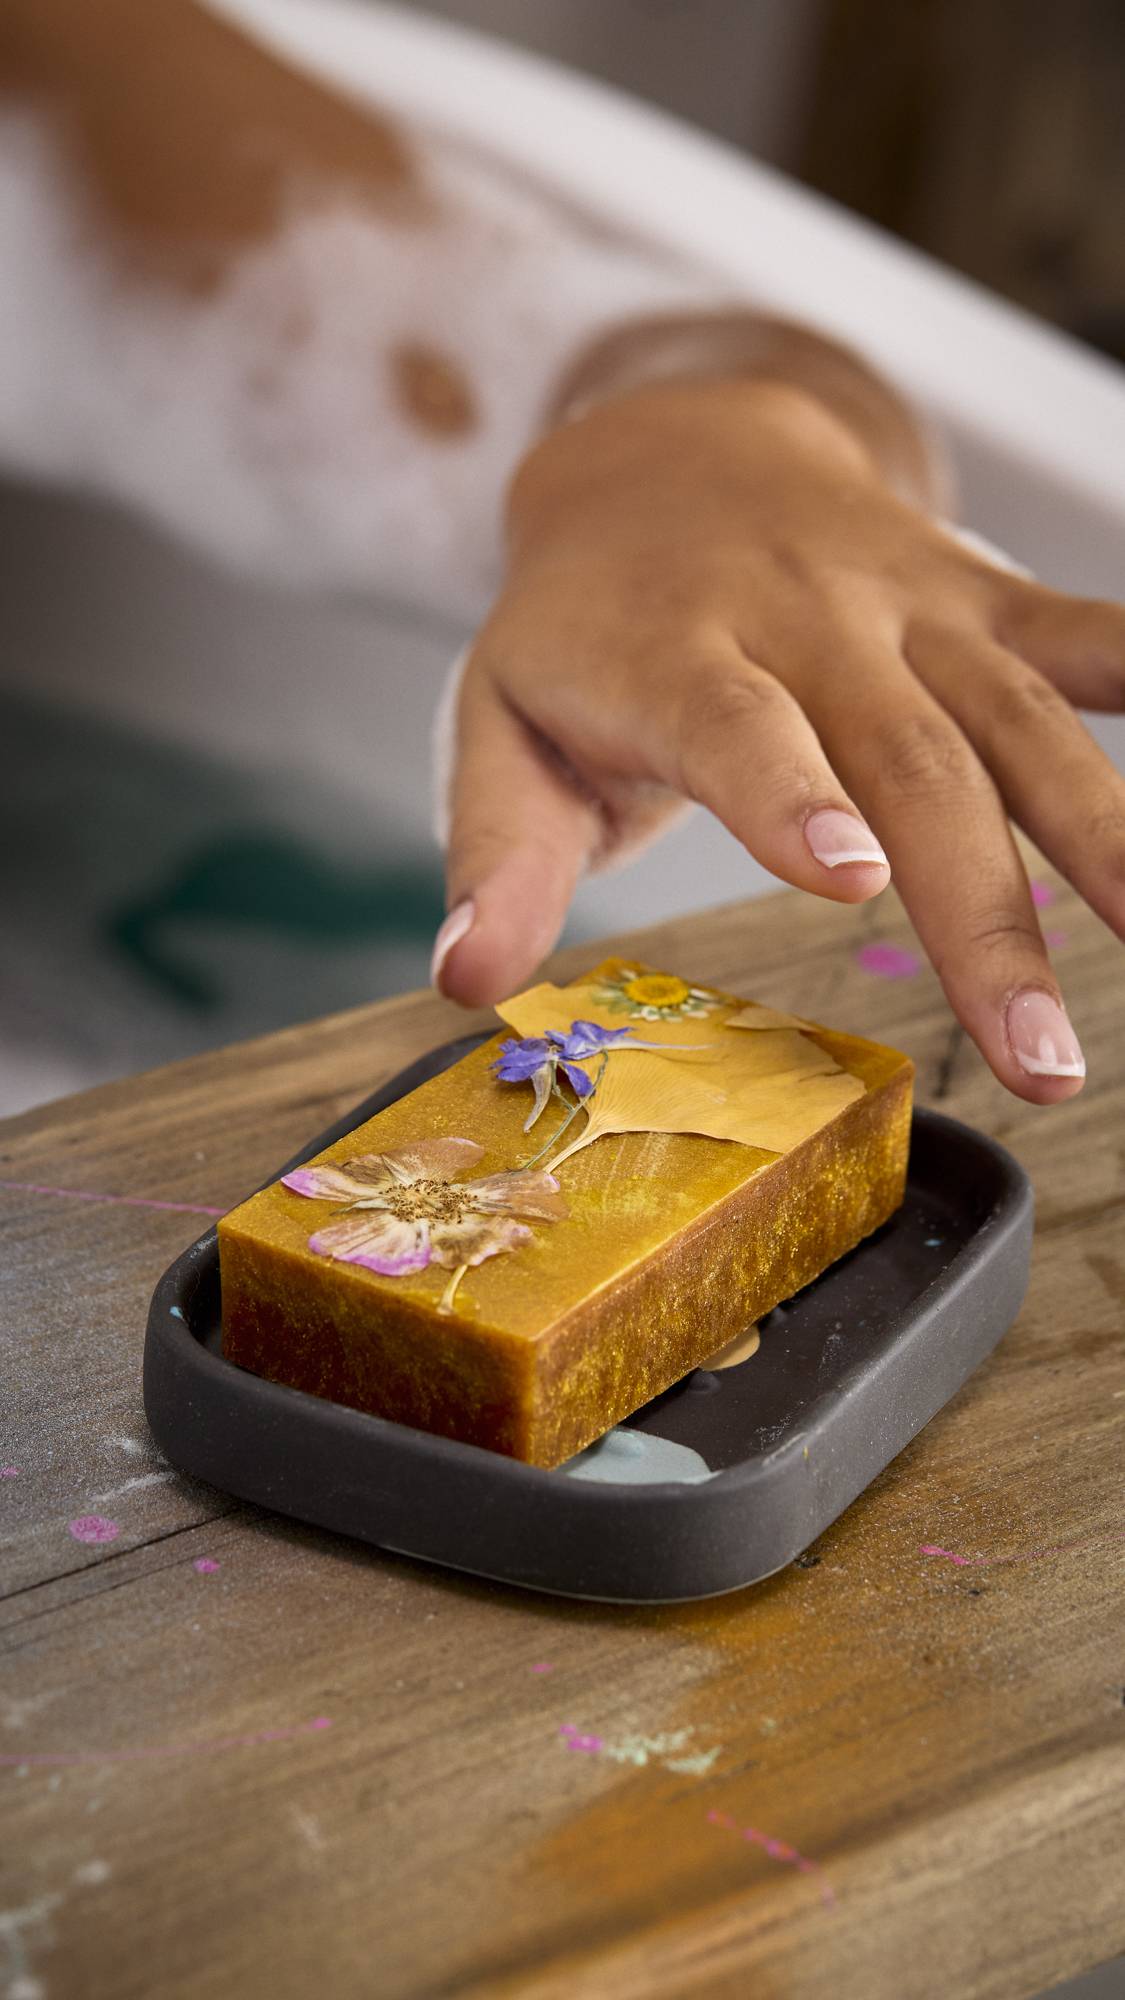 A close-up image of the model's hand reaching for the Sticky Syrup soap in the Kaleidoscope soap dish. 